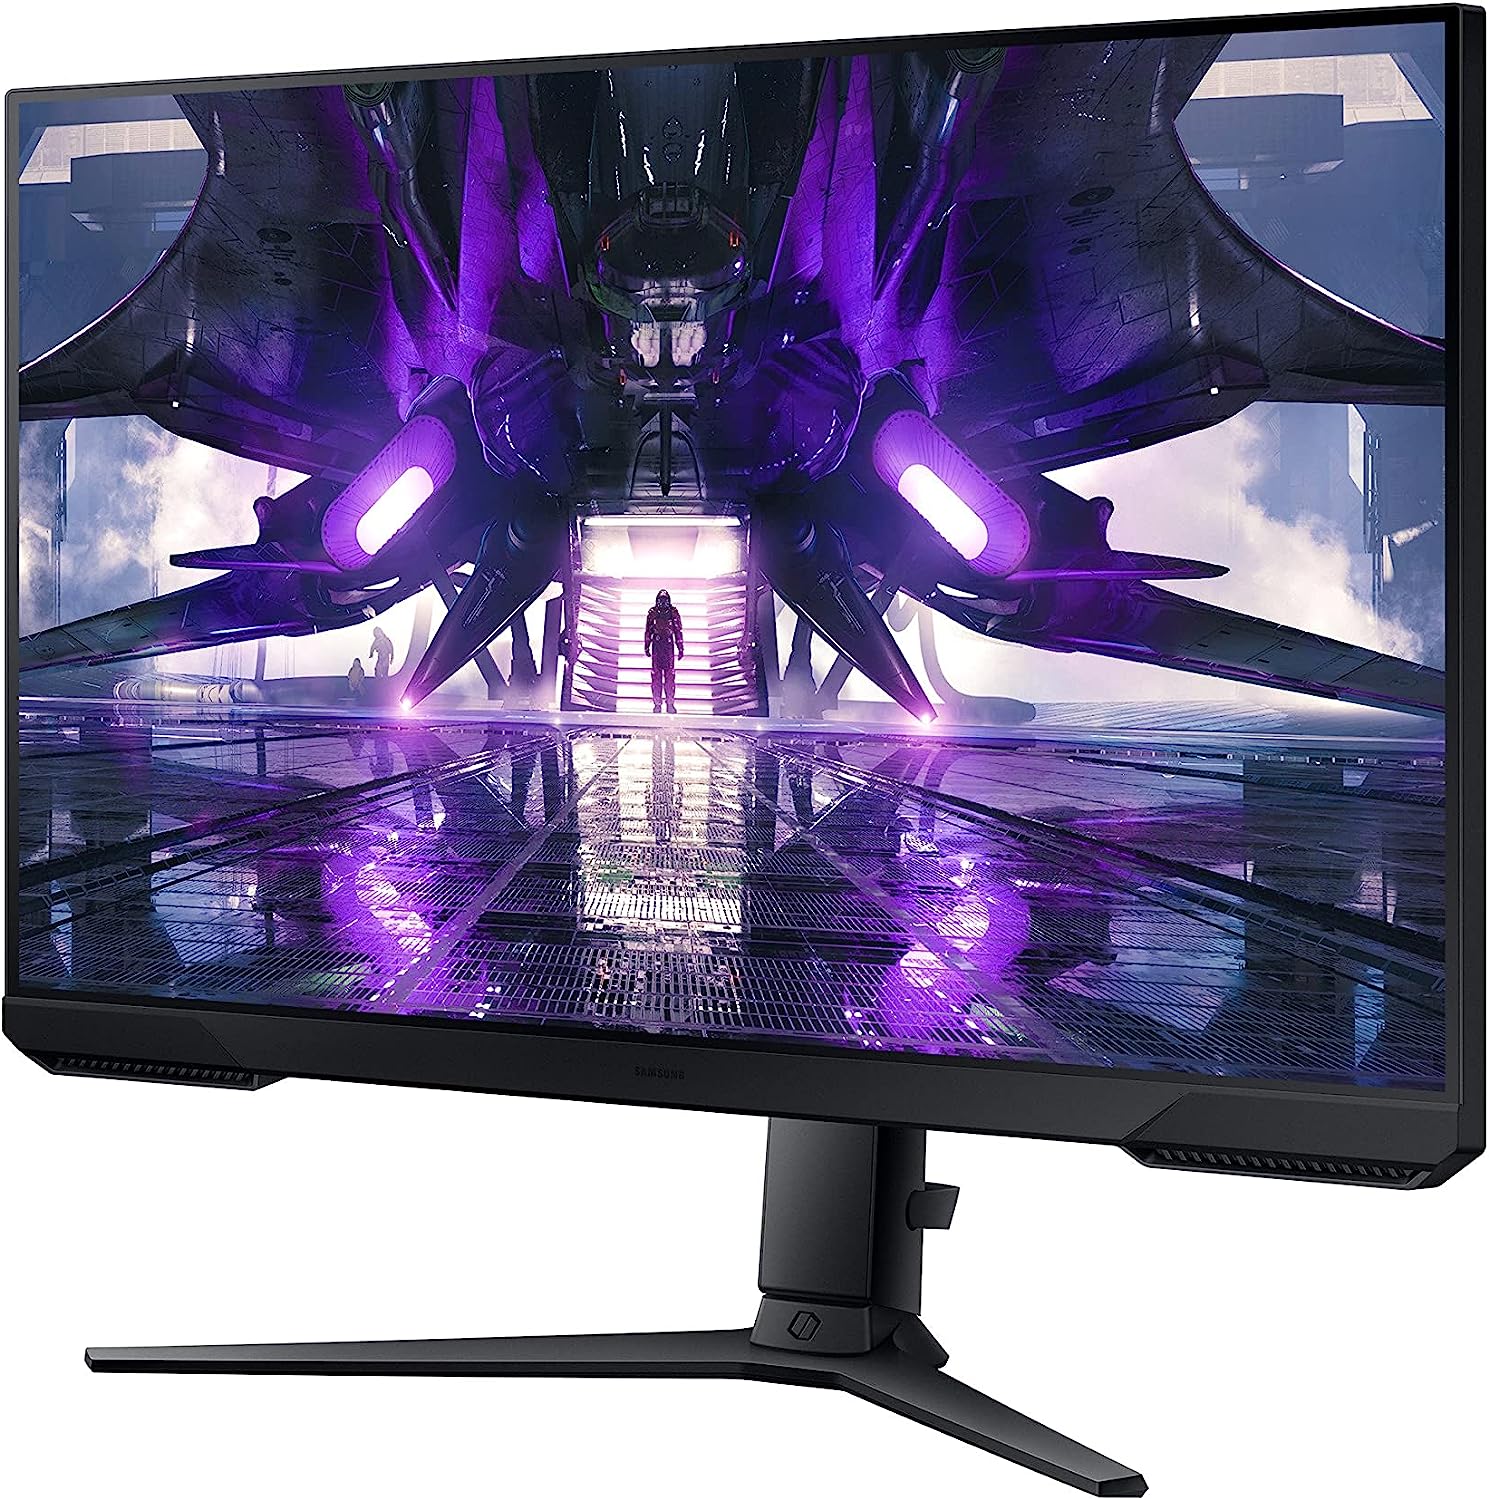 Samsung 27" Odyssey G3 AG300 Full HD Gaming Monitor | Size 27 Inch | Best Gaming Accessories in Bahrain | Halabh